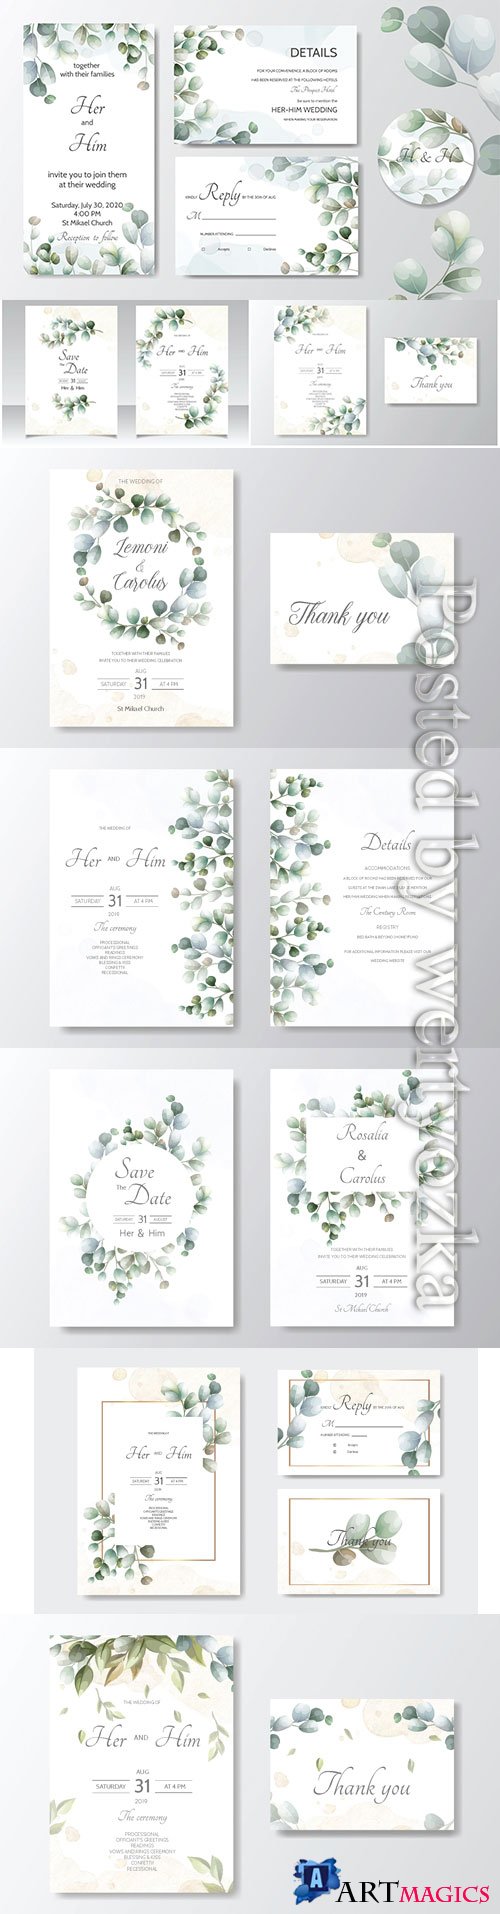 Wedding invitation card with green leaves template